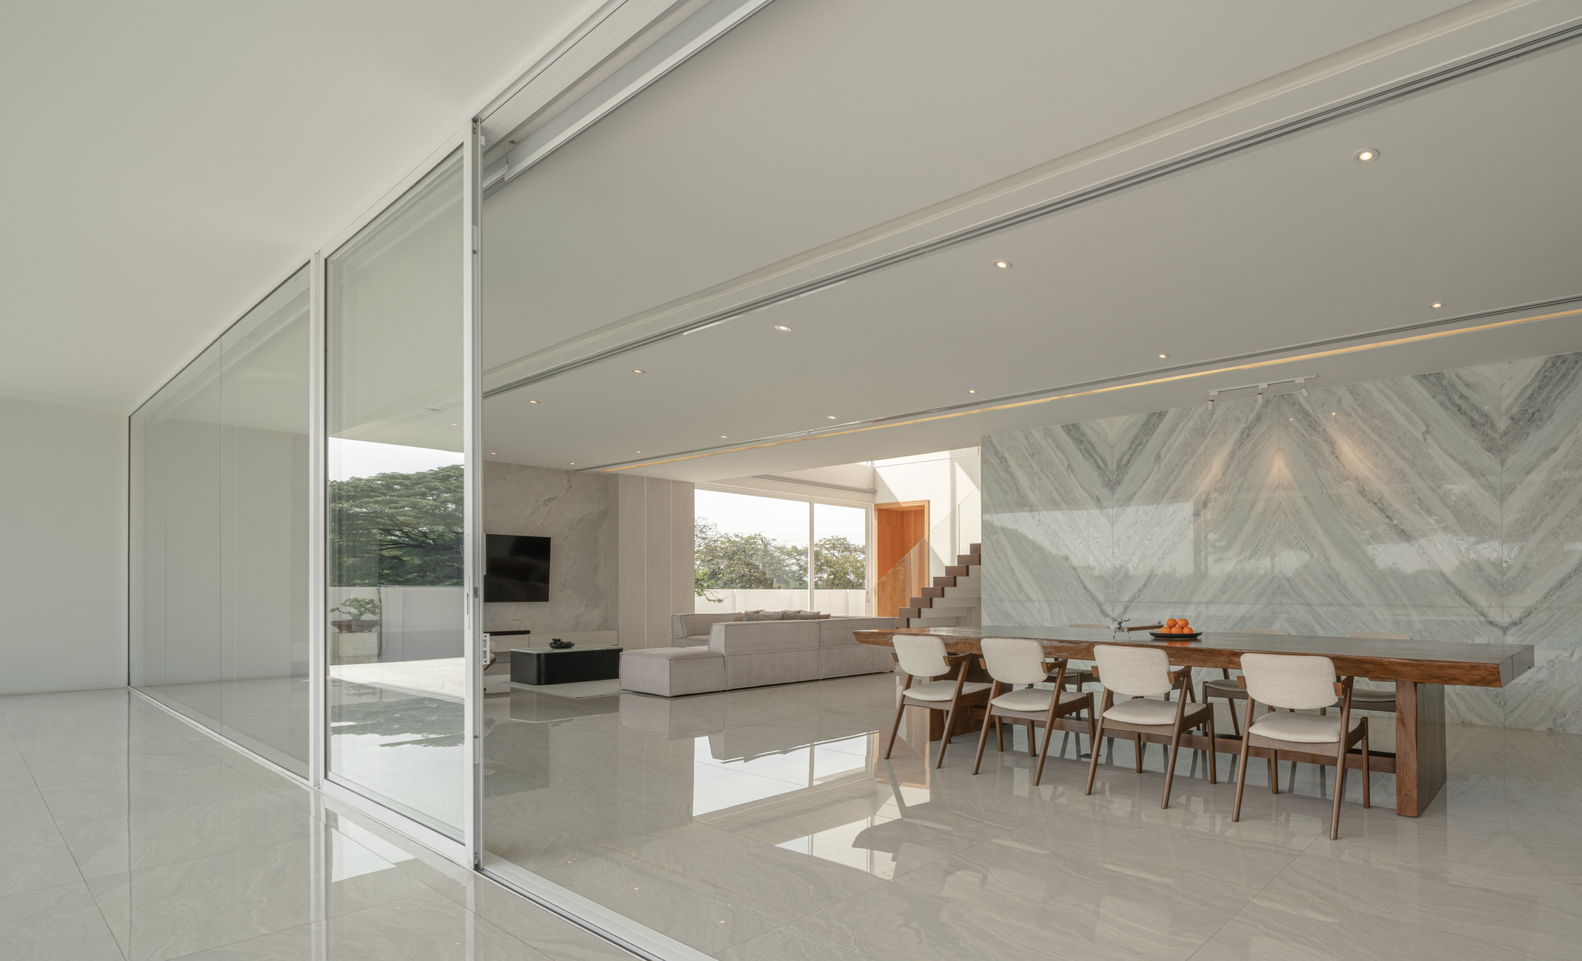 The dining and living rooms of a minimalist home in Thailand. Photos by DOF Sky|Ground.